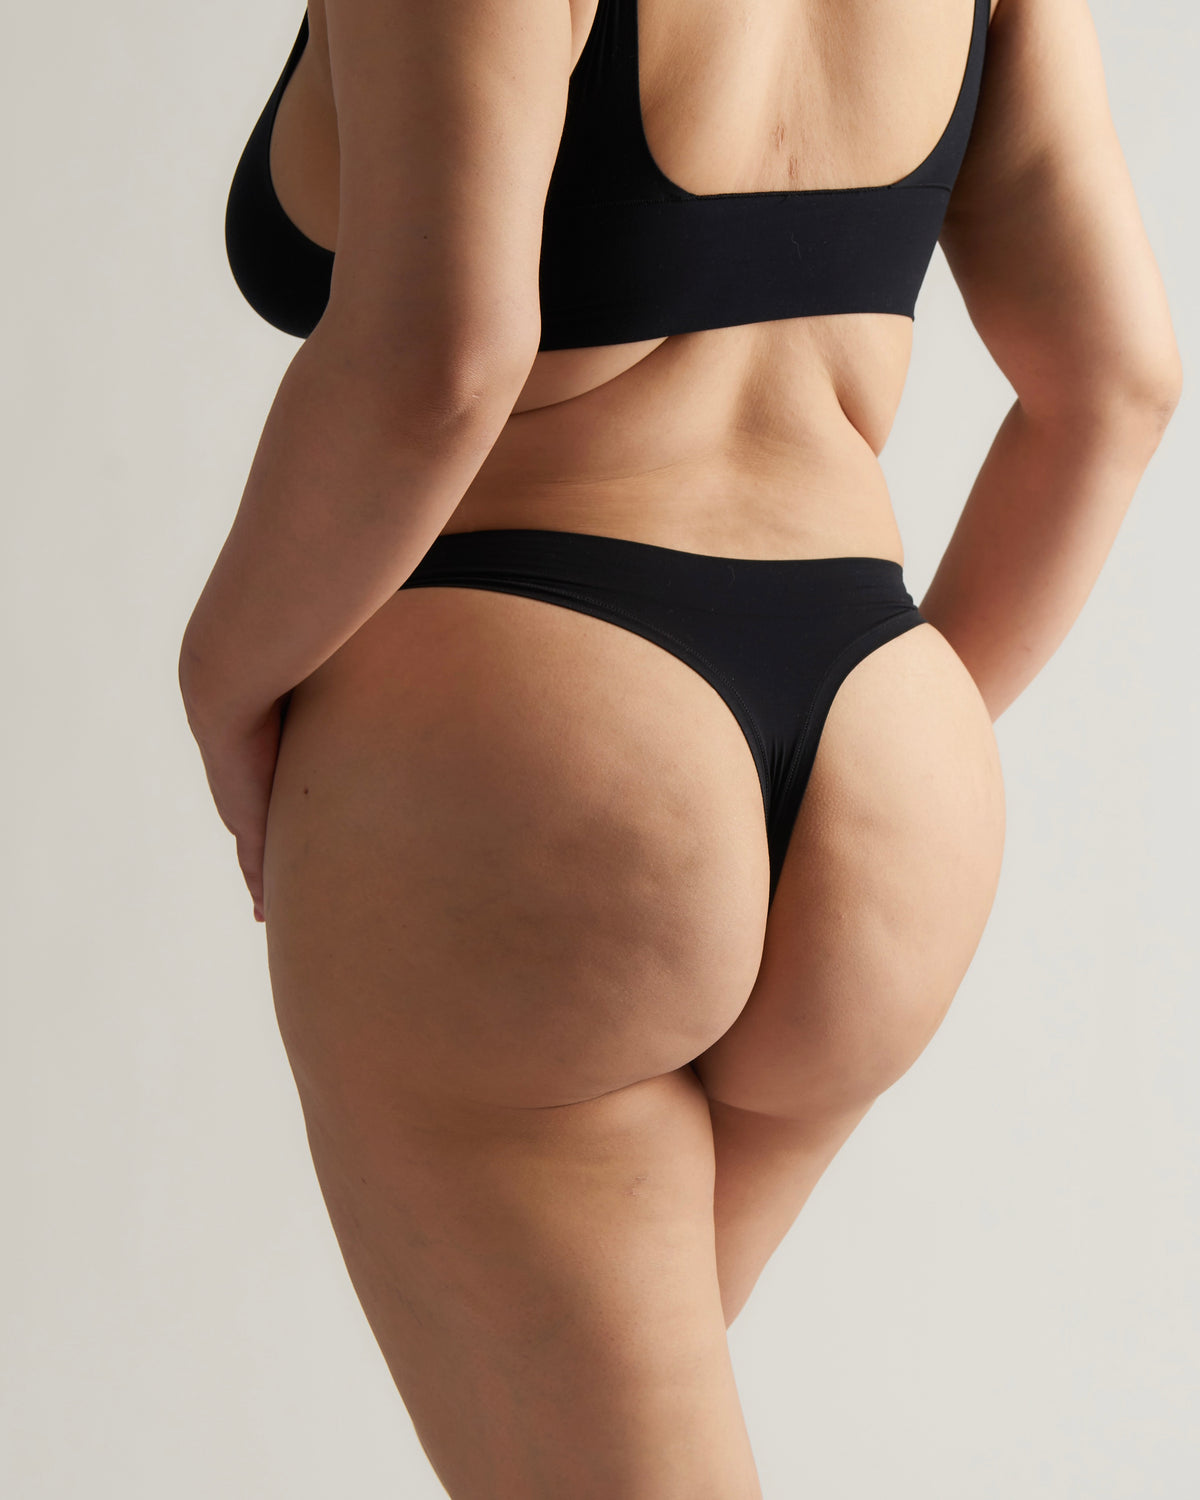 Woman standing wearing the Thong in black